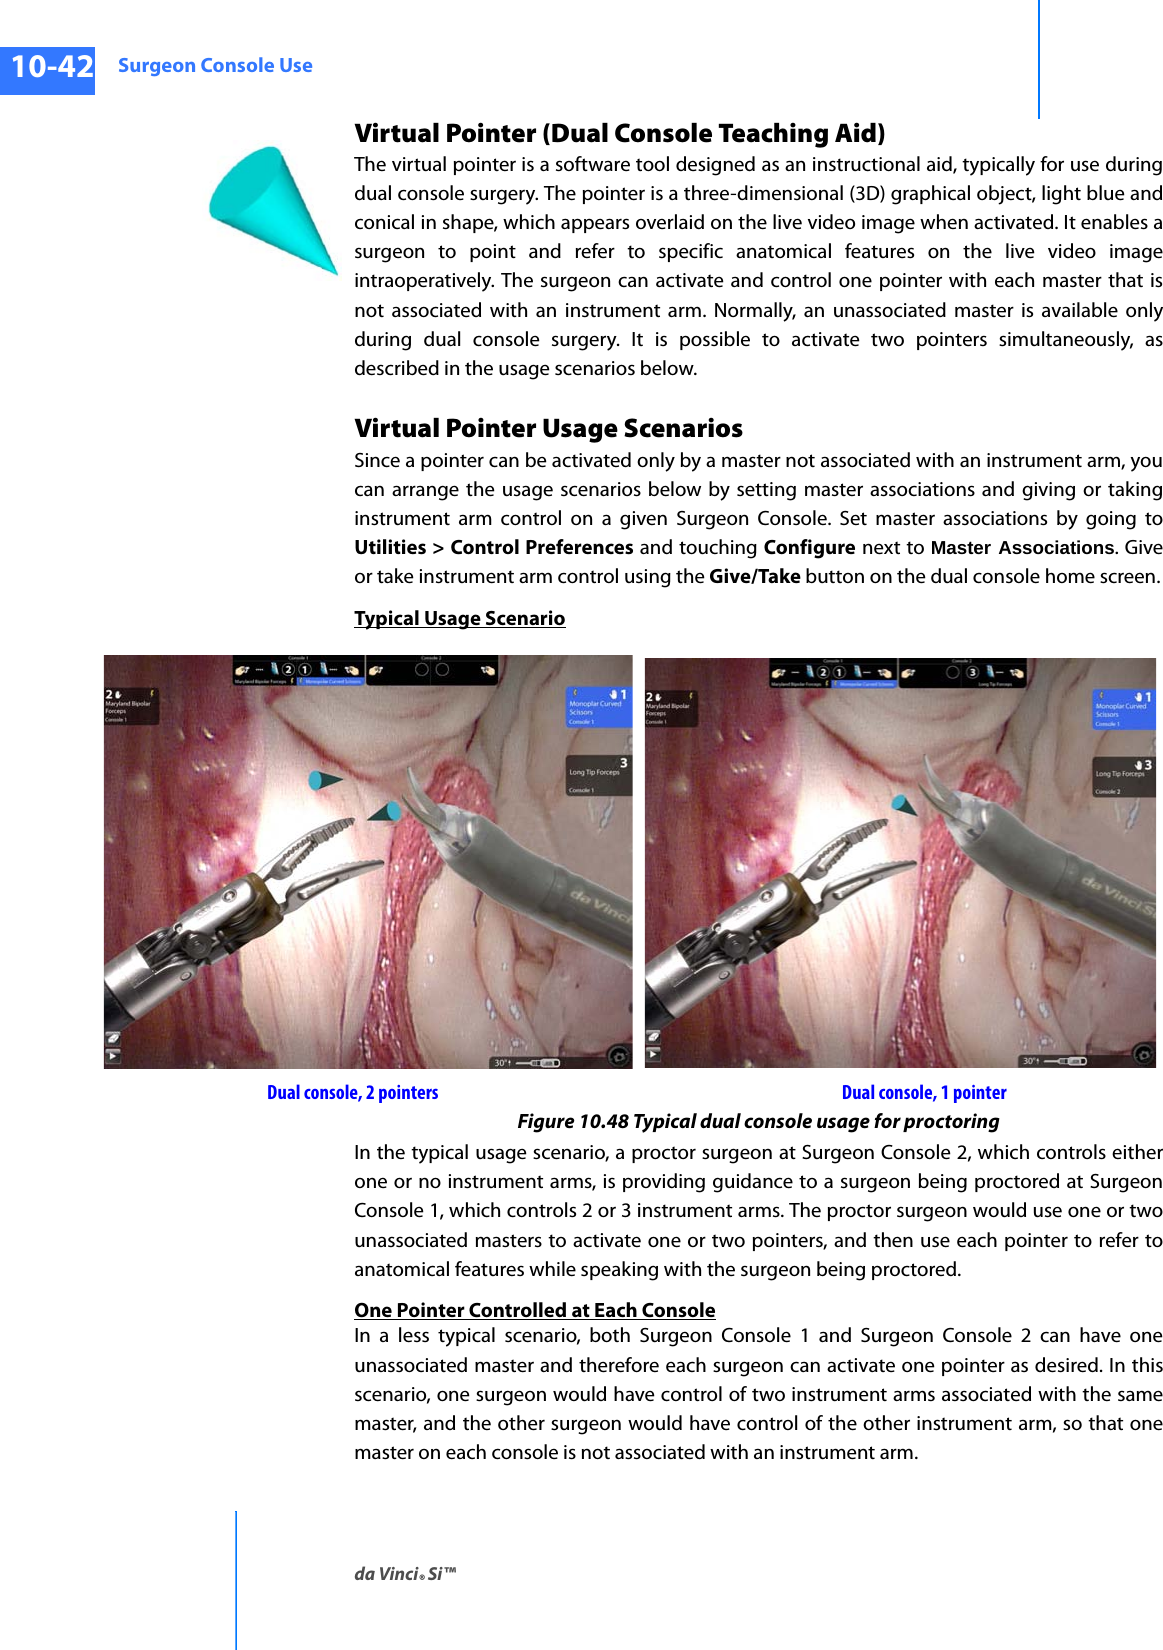 Surgeon Console Useda Vinci® Si™10-42DRAFT/PRE-RELEASE/CONFIDENTIAL10/9/14Virtual Pointer (Dual Console Teaching Aid)The virtual pointer is a software tool designed as an instructional aid, typically for use during dual console surgery. The pointer is a three-dimensional (3D) graphical object, light blue and conical in shape, which appears overlaid on the live video image when activated. It enables a surgeon to point and refer to specific anatomical features on the live video image intraoperatively. The surgeon can activate and control one pointer with each master that is not associated with an instrument arm. Normally, an unassociated master is available only during dual console surgery. It is possible to activate two pointers simultaneously, as described in the usage scenarios below. Virtual Pointer Usage ScenariosSince a pointer can be activated only by a master not associated with an instrument arm, you can arrange the usage scenarios below by setting master associations and giving or taking instrument arm control on a given Surgeon Console. Set master associations by going to Utilities &gt; Control Preferences and touching Configure next to Master Associations. Give or take instrument arm control using the Give/Take button on the dual console home screen.Typical Usage ScenarioFigure 10.48 Typical dual console usage for proctoringIn the typical usage scenario, a proctor surgeon at Surgeon Console 2, which controls either one or no instrument arms, is providing guidance to a surgeon being proctored at Surgeon Console 1, which controls 2 or 3 instrument arms. The proctor surgeon would use one or two unassociated masters to activate one or two pointers, and then use each pointer to refer to anatomical features while speaking with the surgeon being proctored.One Pointer Controlled at Each ConsoleIn a less typical scenario, both Surgeon Console 1 and Surgeon Console 2 can have one unassociated master and therefore each surgeon can activate one pointer as desired. In this scenario, one surgeon would have control of two instrument arms associated with the same master, and the other surgeon would have control of the other instrument arm, so that one master on each console is not associated with an instrument arm.Dual console, 2 pointers Dual console, 1 pointer